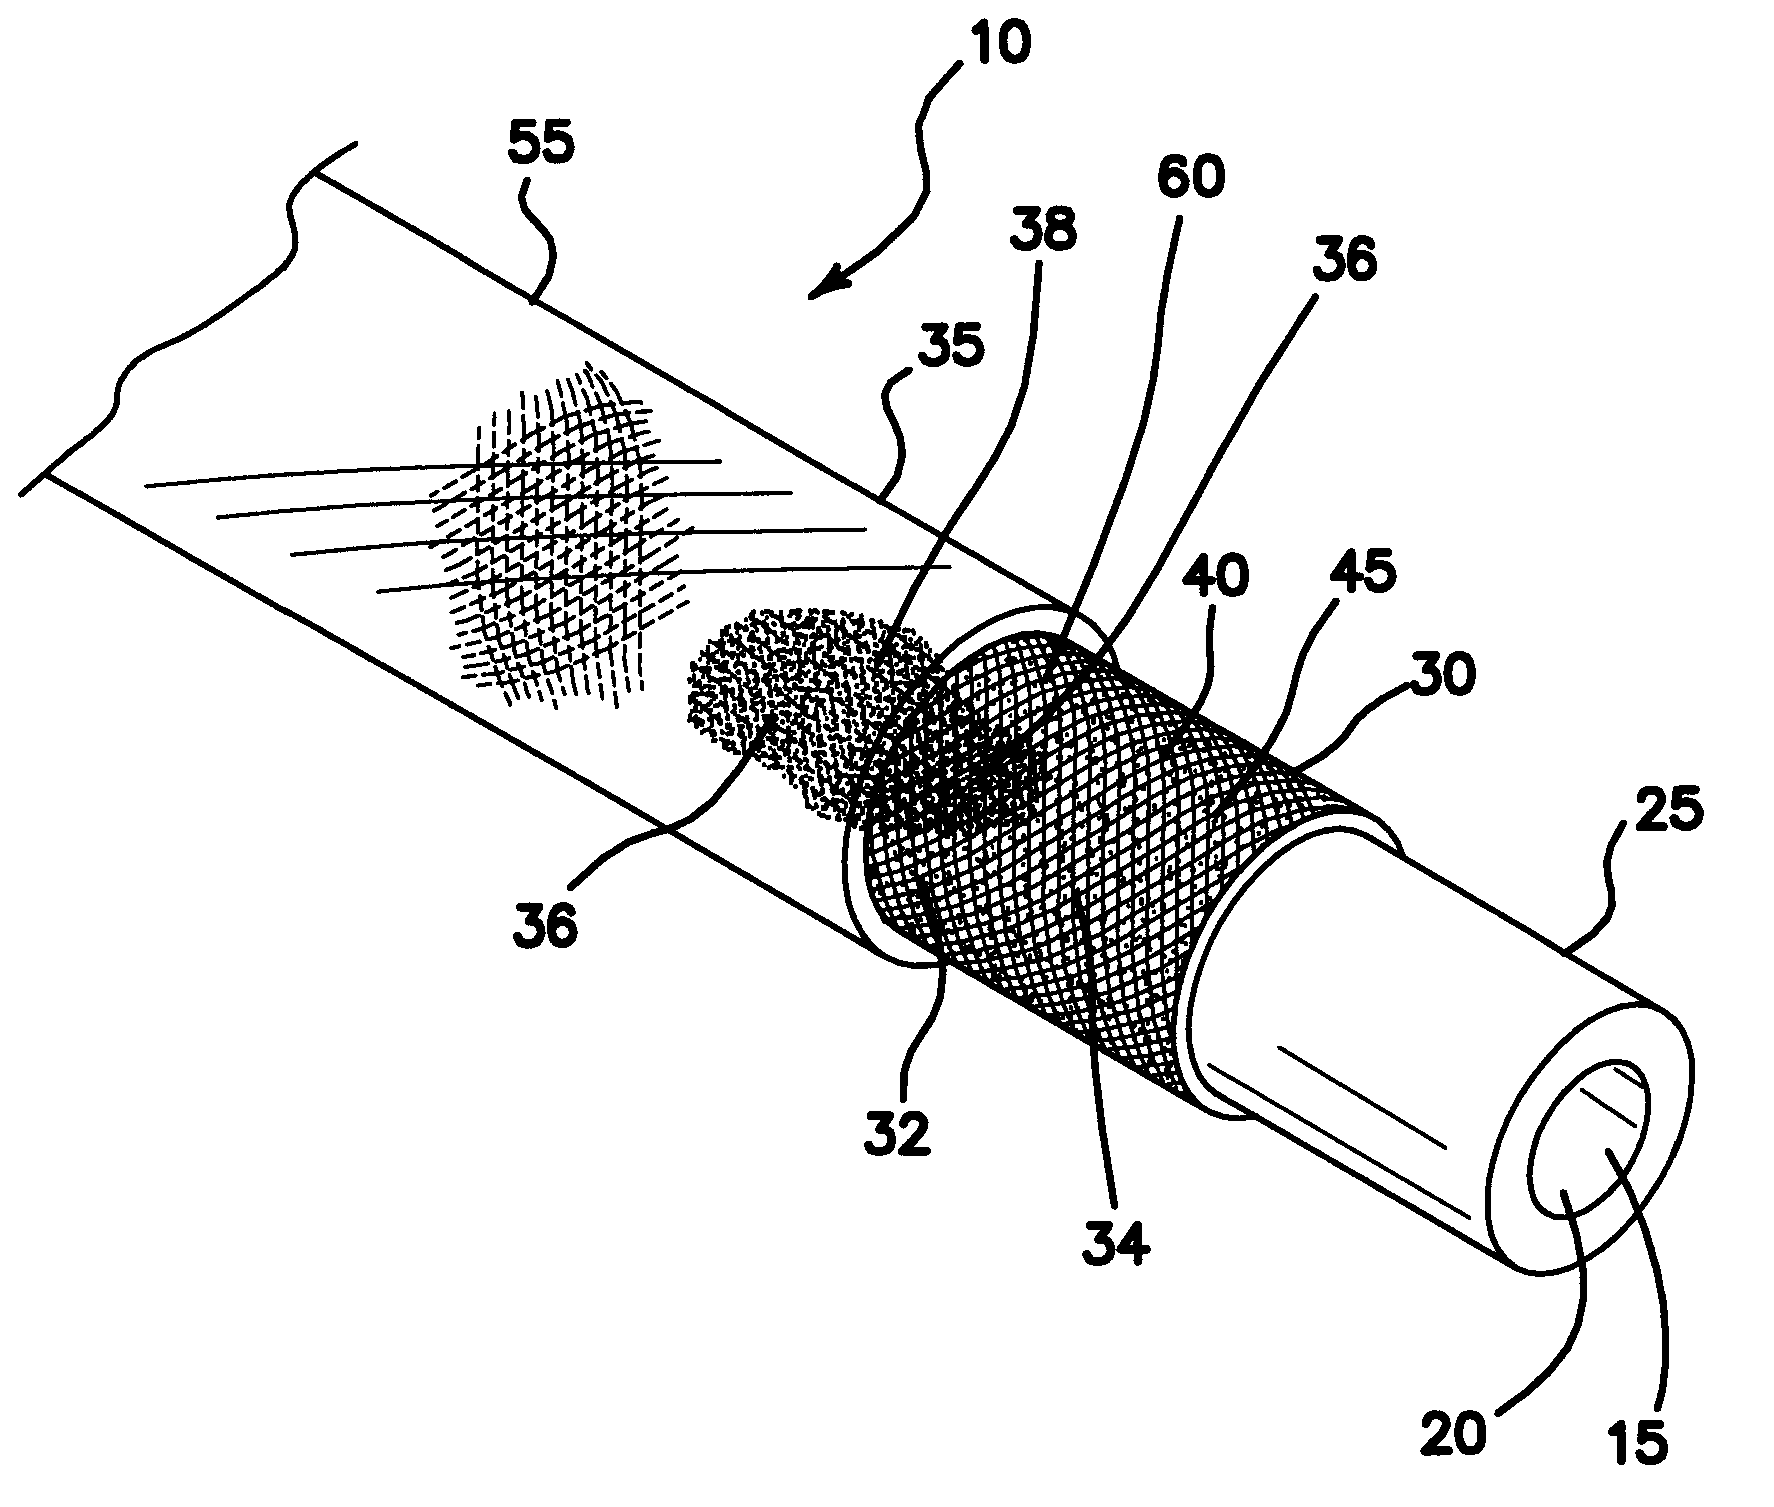 Reinforced flexible hose with leakage indicator and method of making same